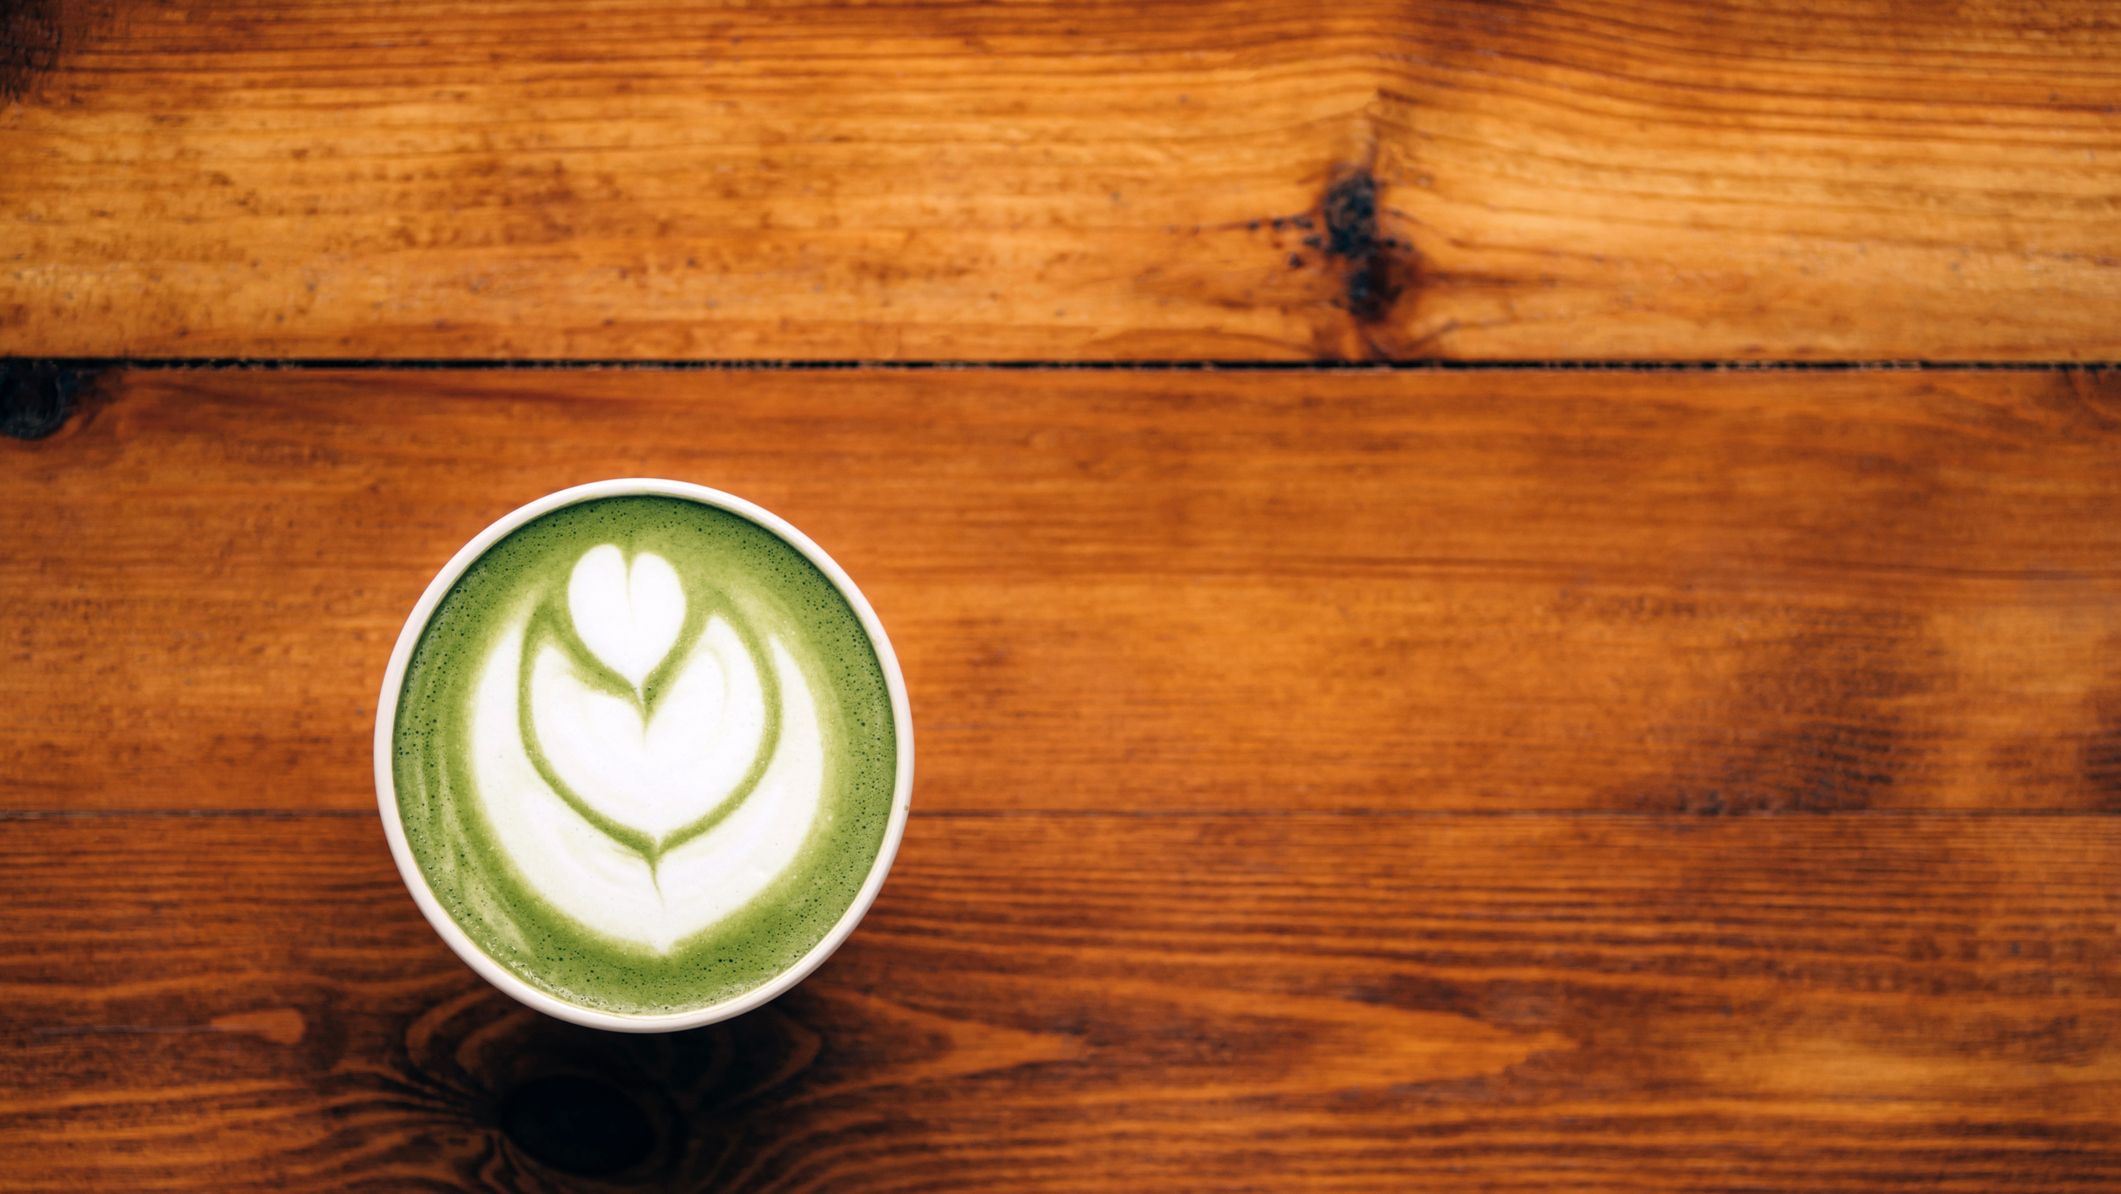 https://hips.hearstapps.com/hmg-prod/images/matcha-green-tea-latte-with-foam-art-in-ceramic-cup-royalty-free-image-1690569632.jpg?crop=1xw:0.84415xh;center,top